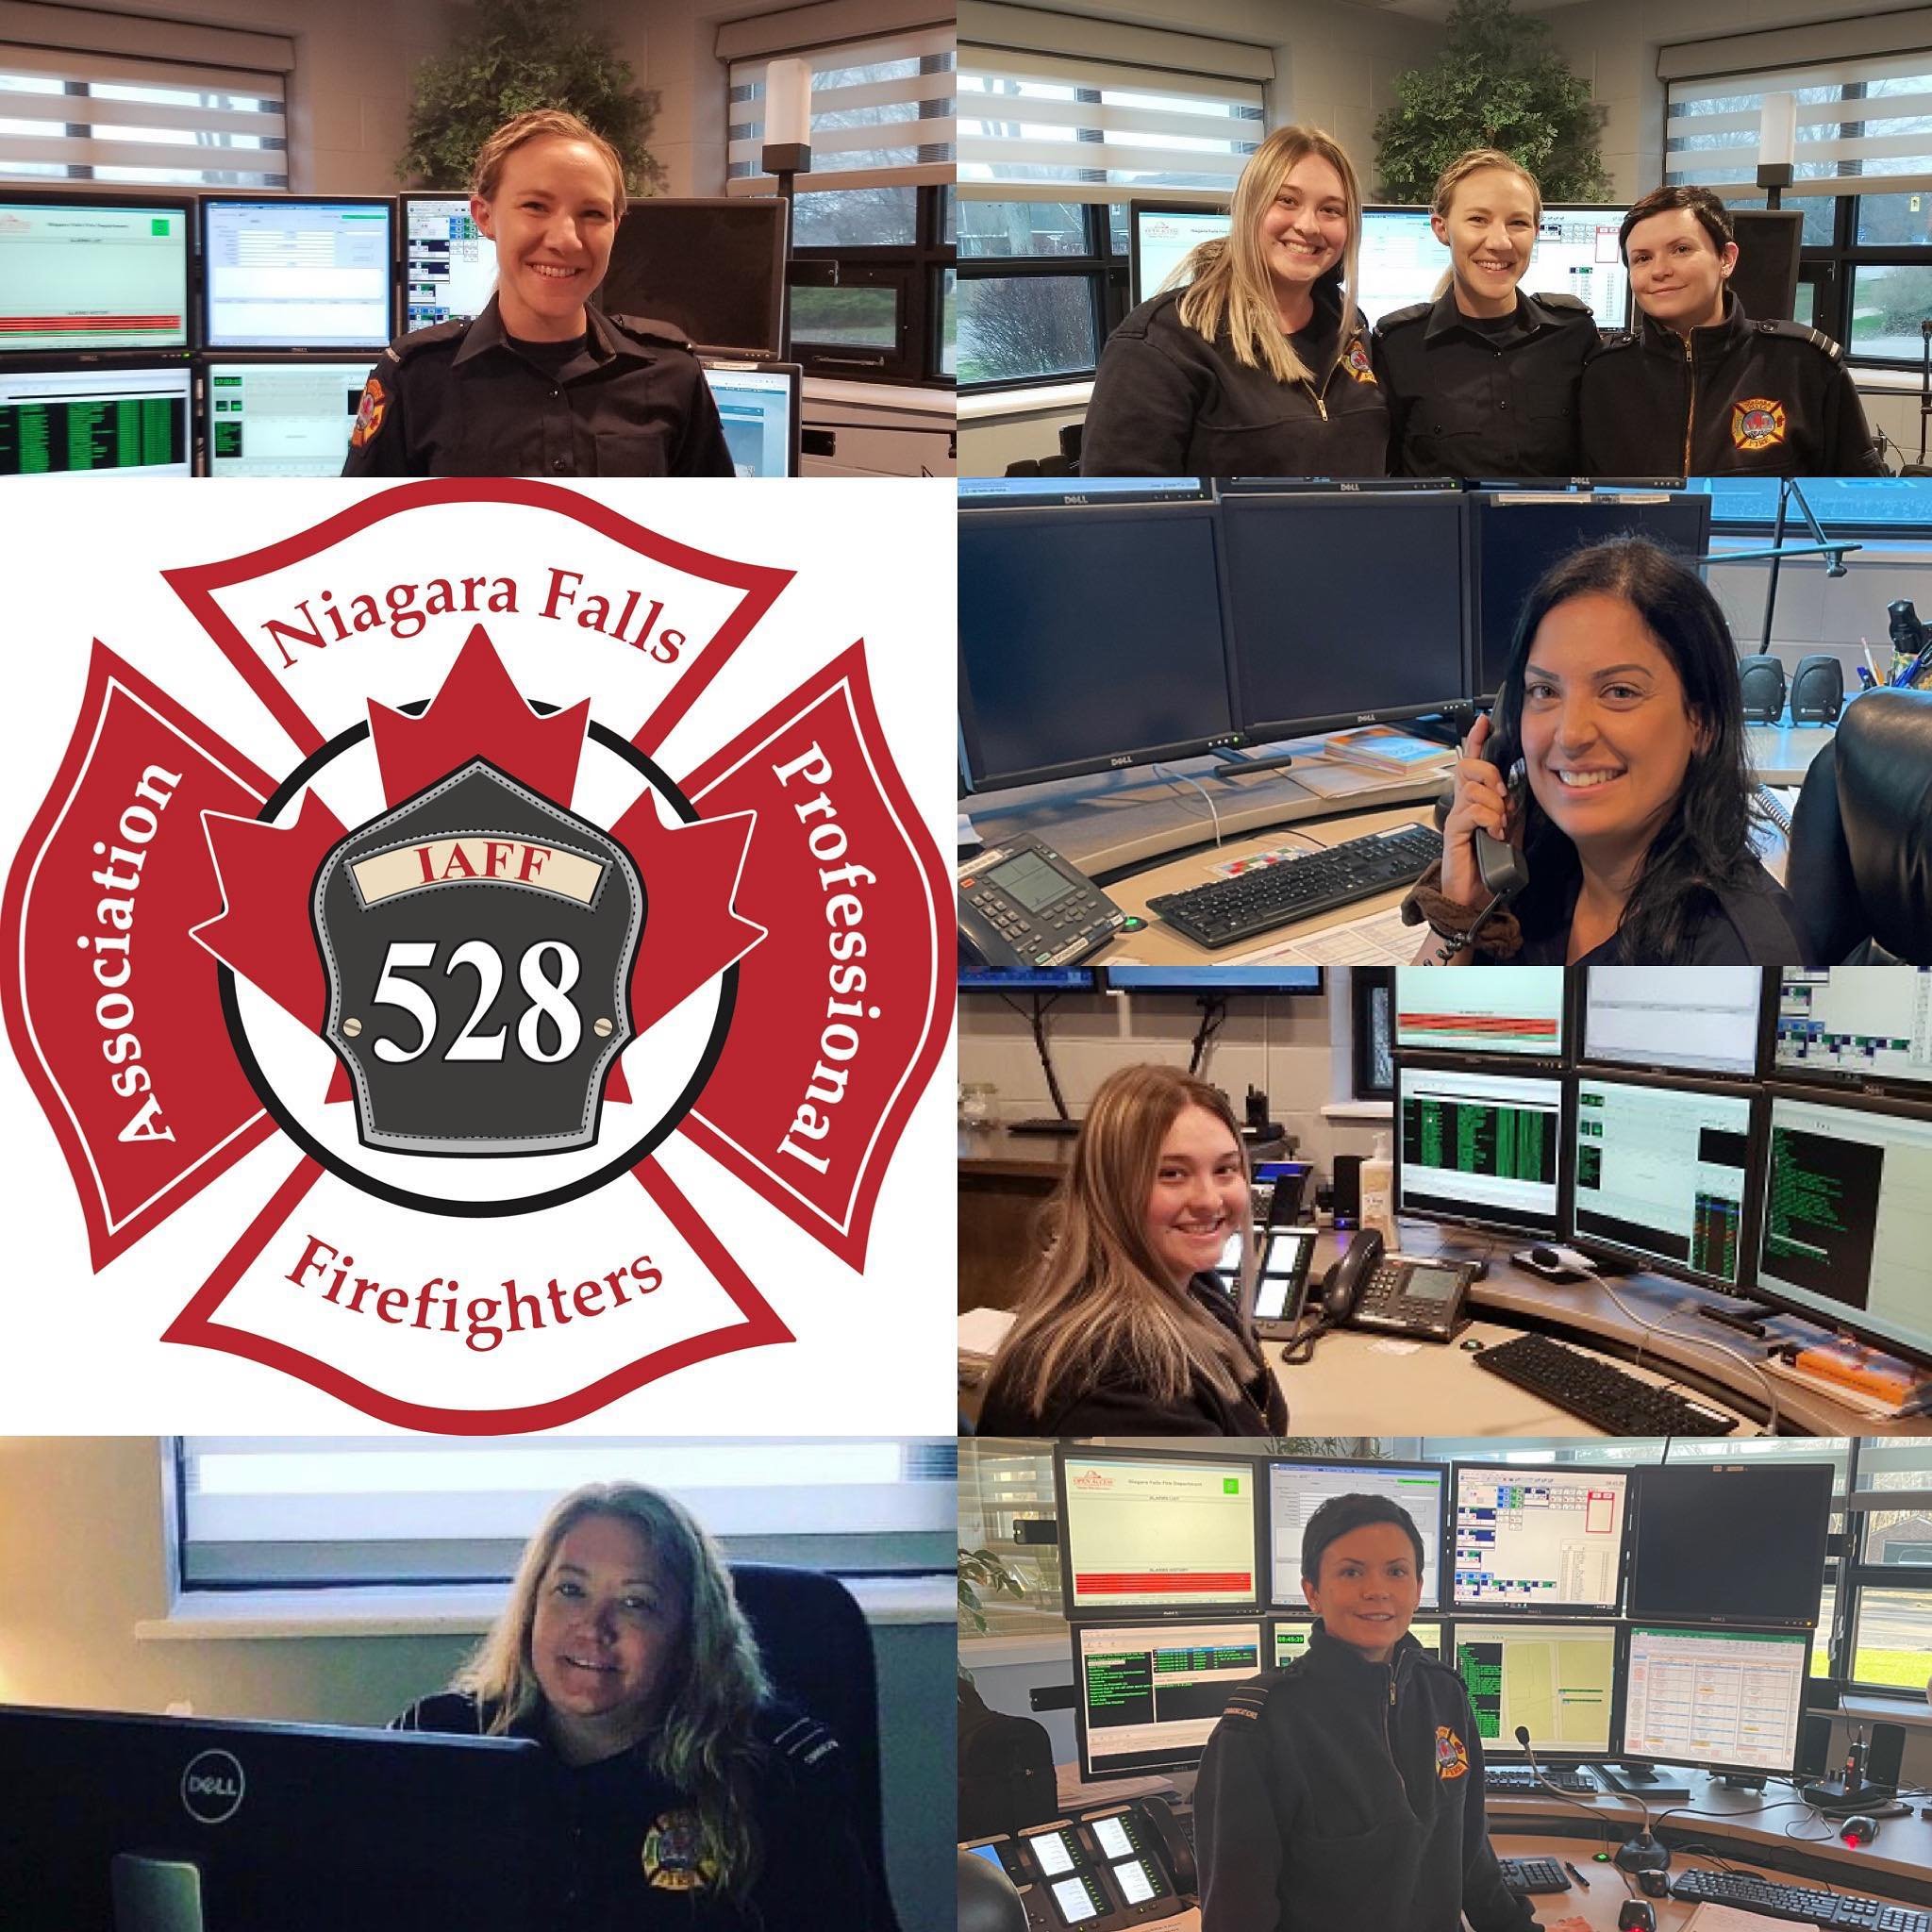 A special thanks to the voices on the other end of the line. We are very lucky to have our own communications center at the NFFD. The work our communicators do behind the scenes is second to none #nationalpublicsafetytelecommunicatorsweek @iaffoffici